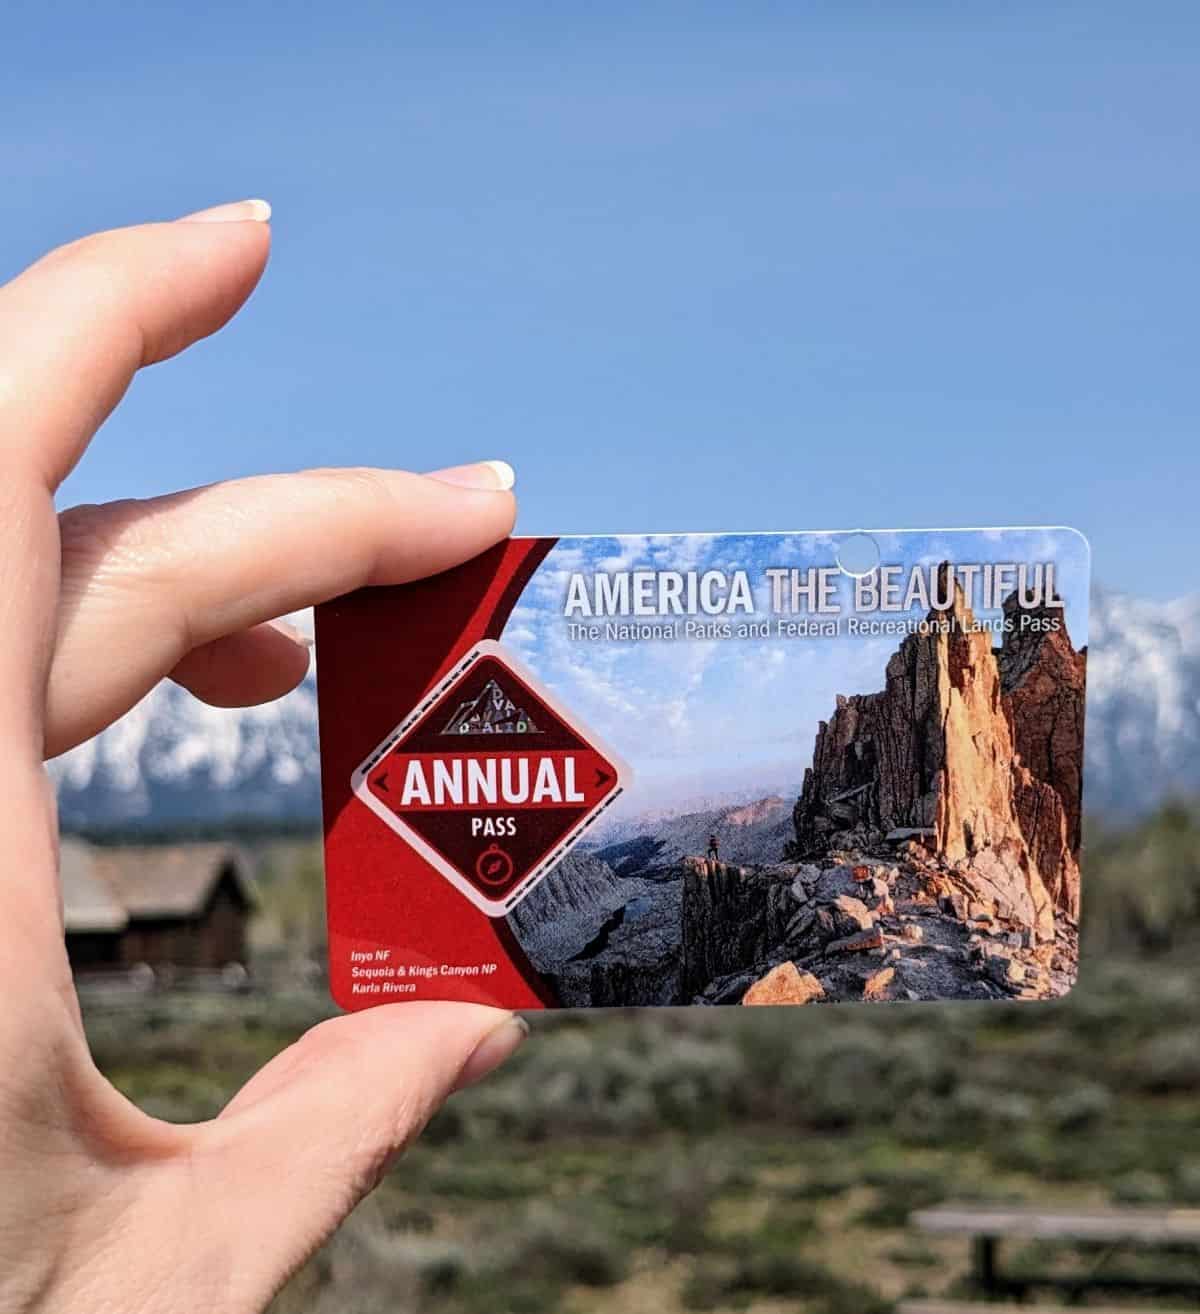 hand holding an America the Beautiful annual pass in front of a mountain scene